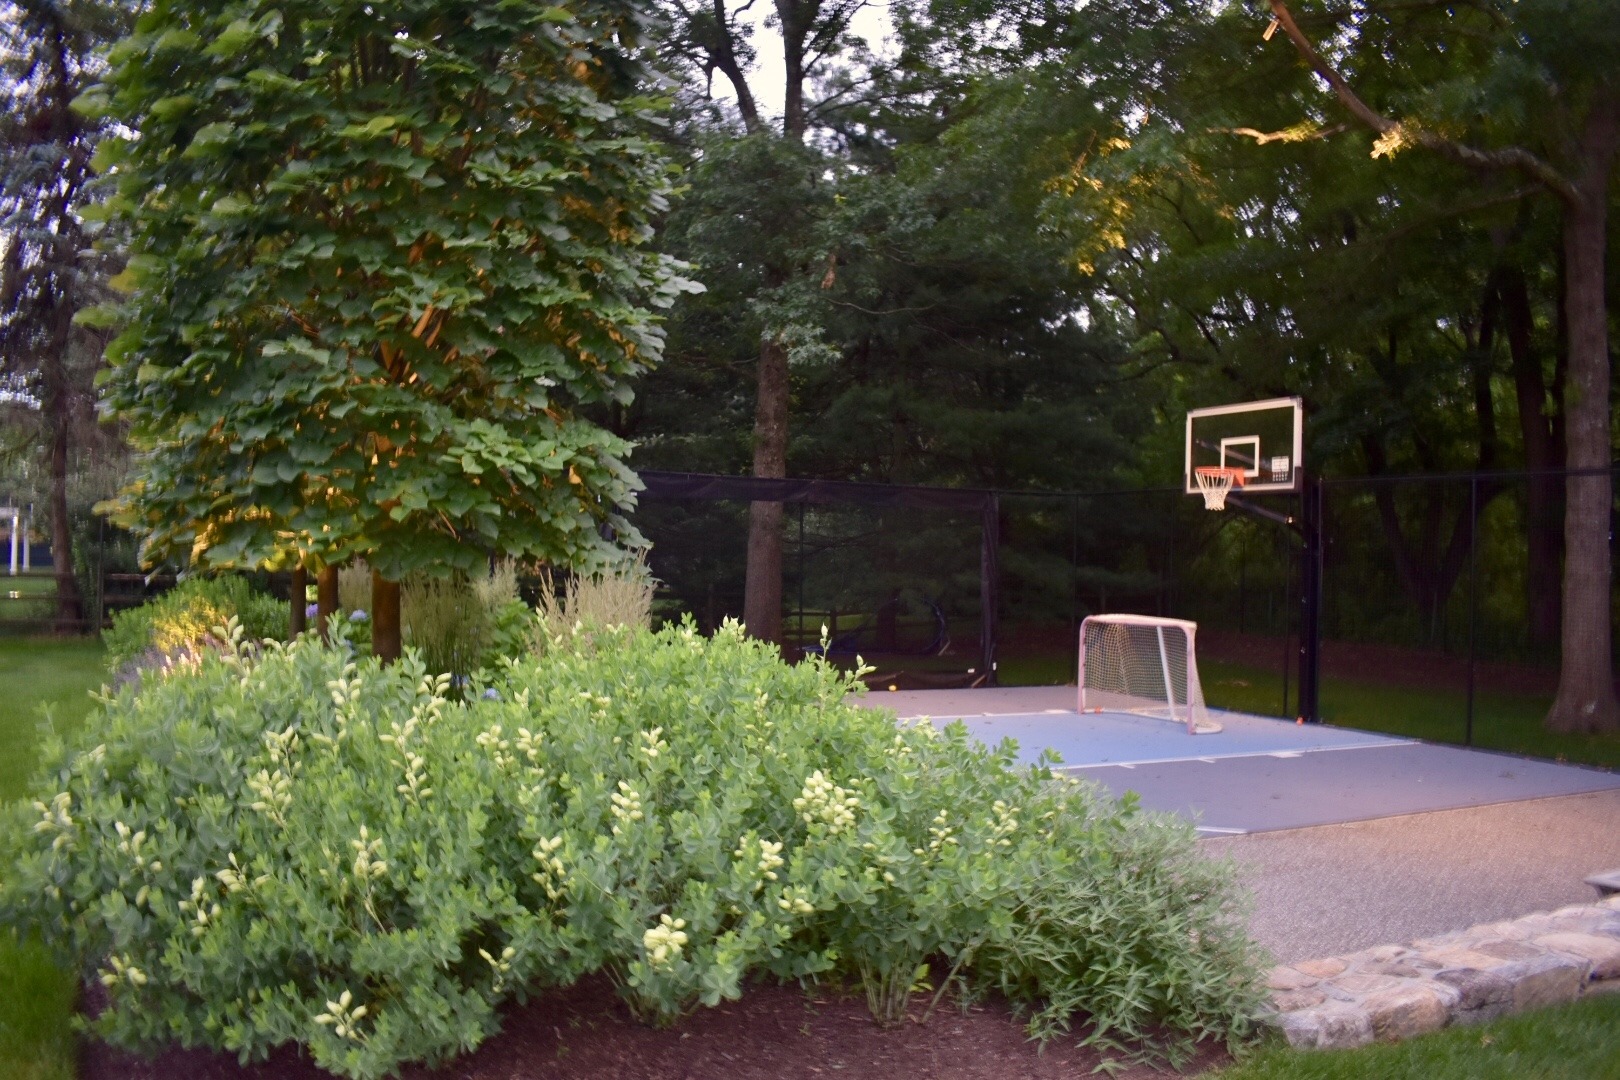 An outdoor recreational area with a basketball hoop on a paved court, surrounded by lush greenery and trees, during dusk or early evening.